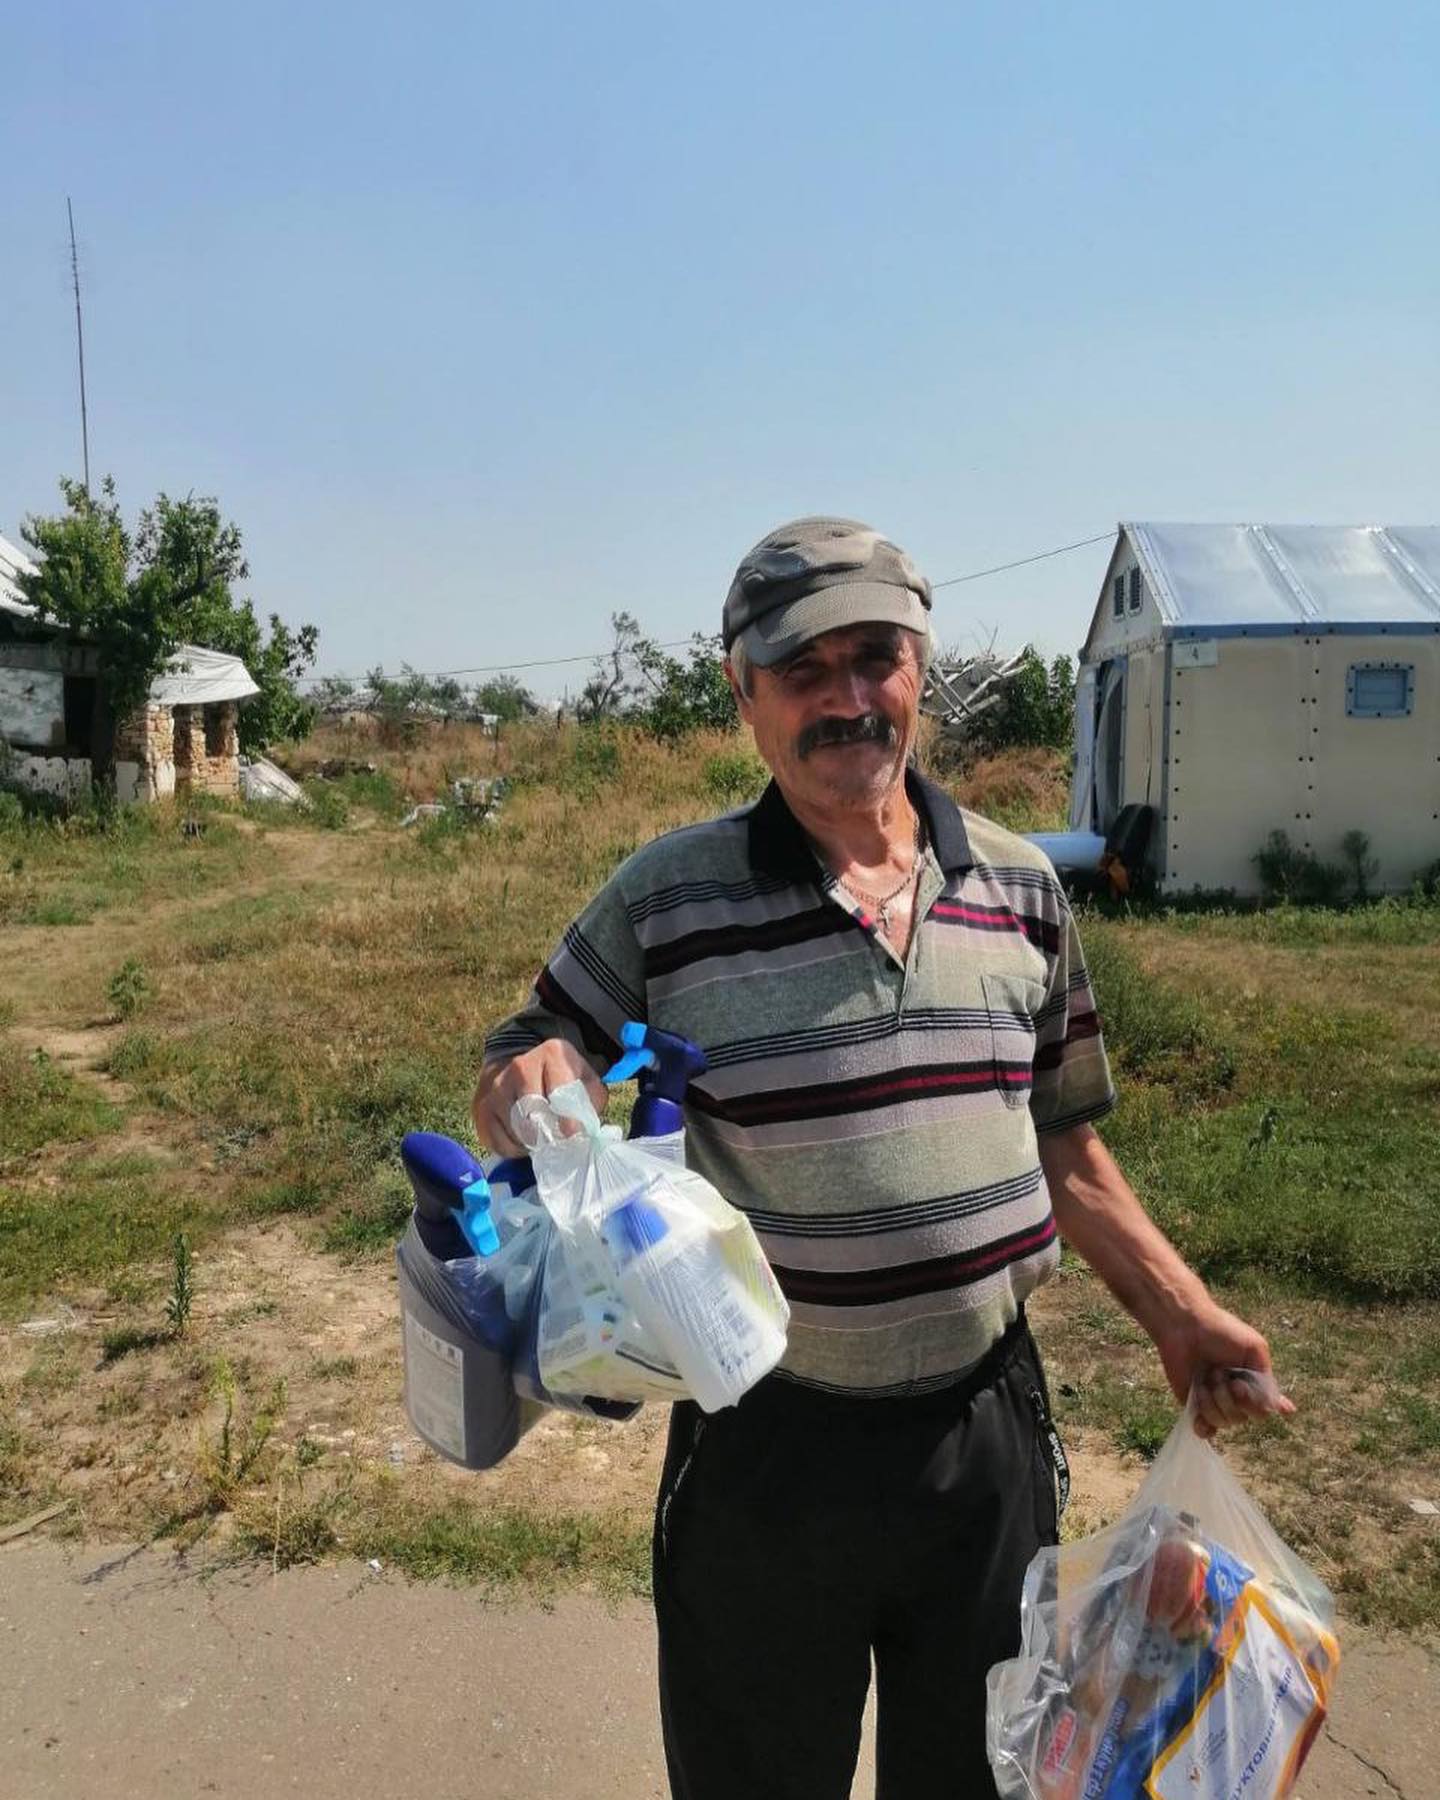 A man holding a bag of groceries in front of a house.